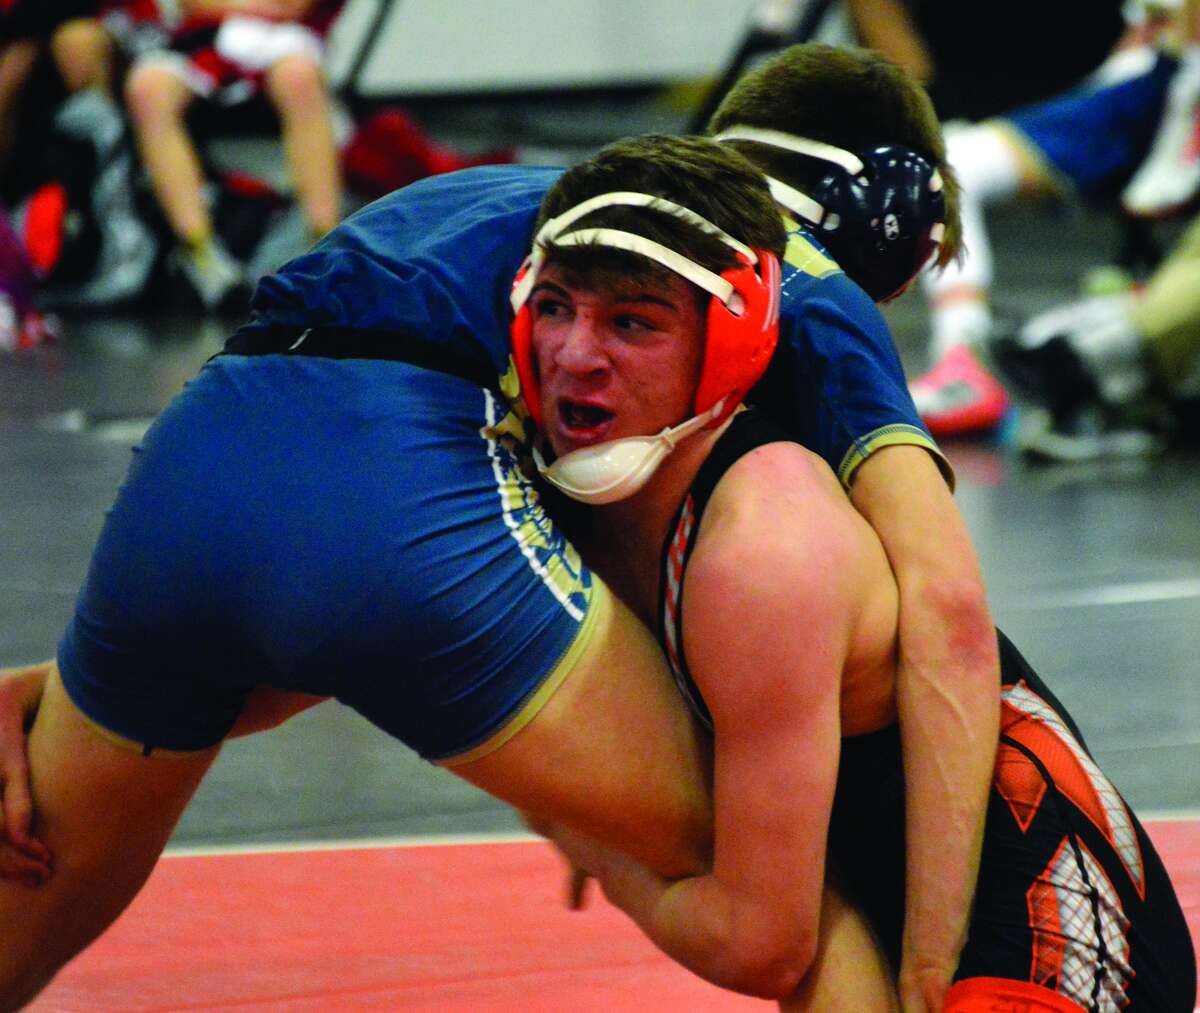 Edwardsville’s Dylan Wright, right, battles Althoff’s Max Kristoff at 138 pounds.